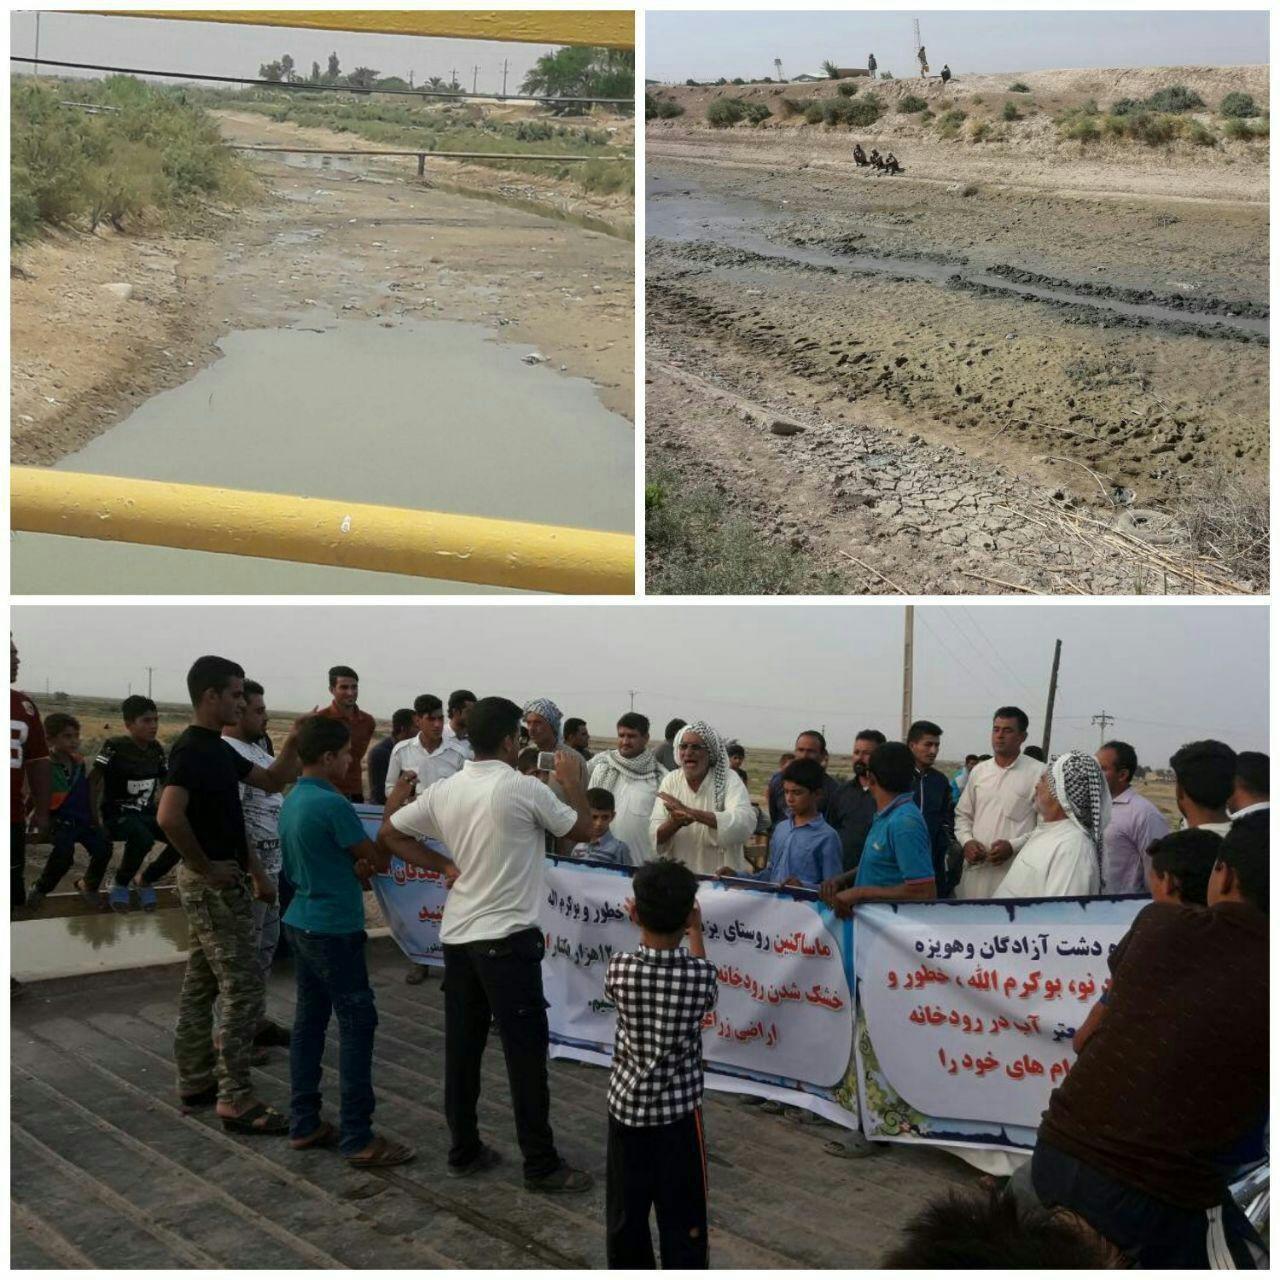  Karkheh: Residents of 4 vilages gathering to protest the water shortage and the drying of Karkheh river